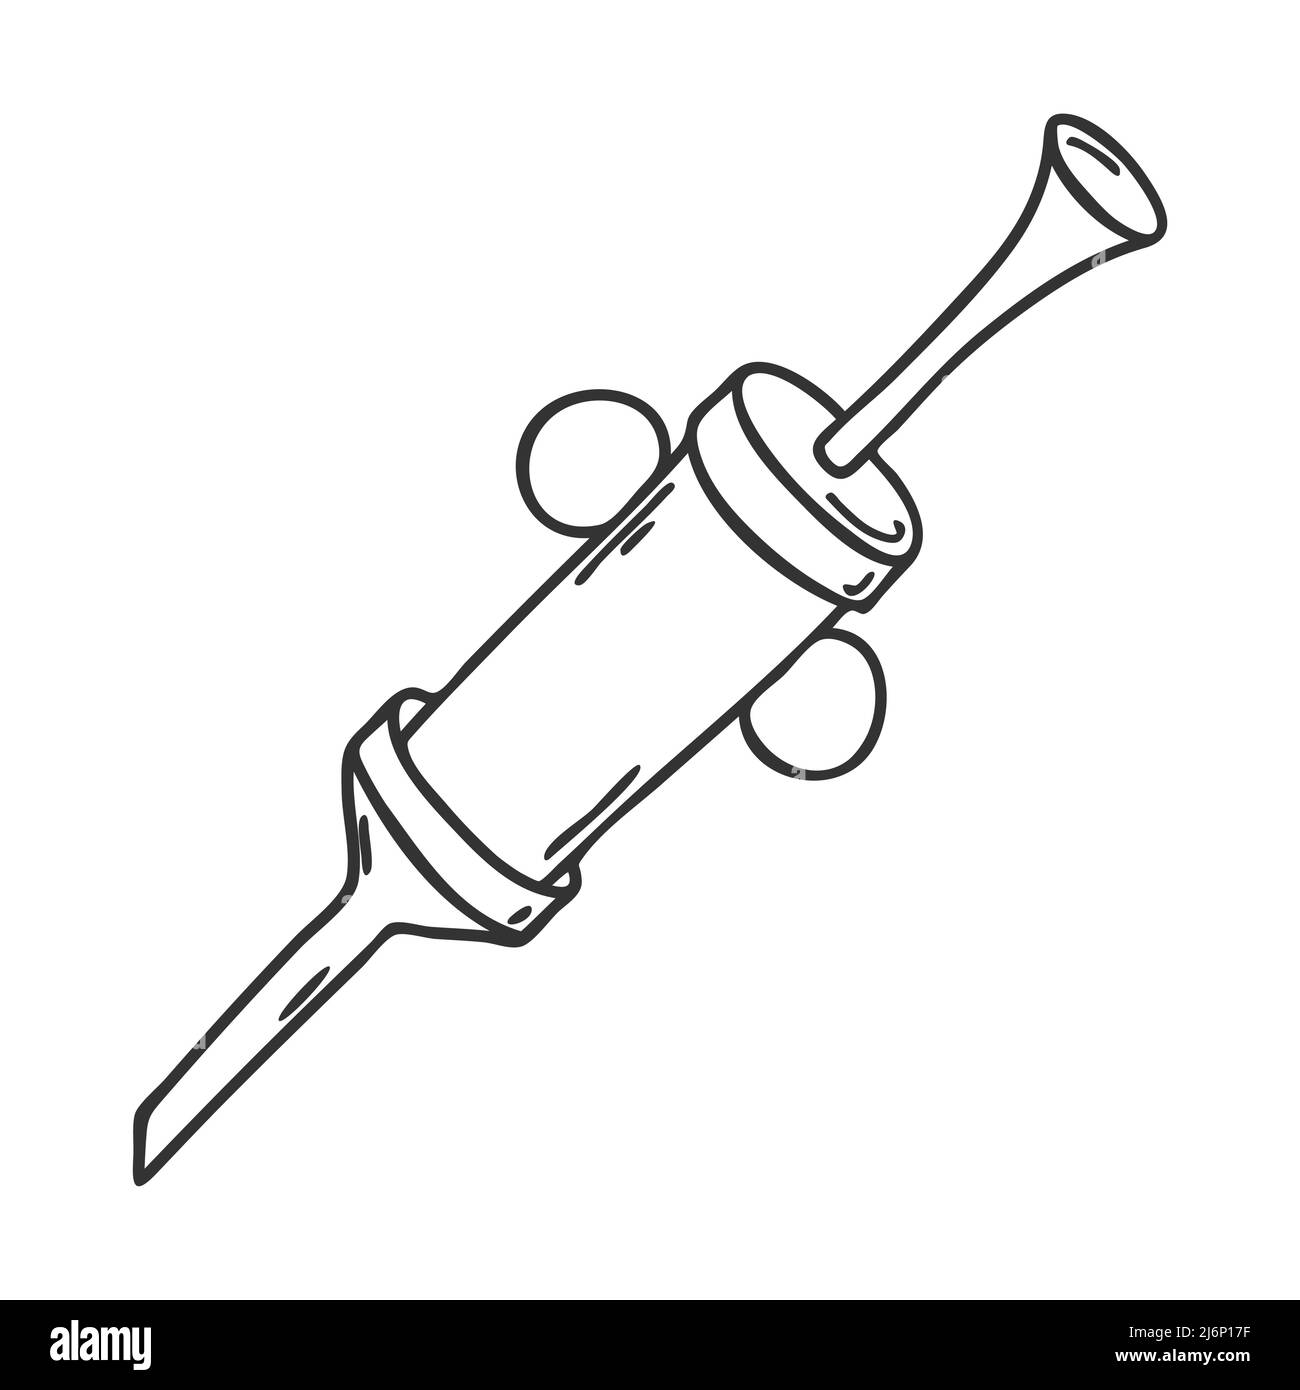 Pastry syringe. Cooking bag for the cream. Kitchen utensils. Design element for decoration menu design, recipes, and food packaging. Hand drawn and is Stock Vector